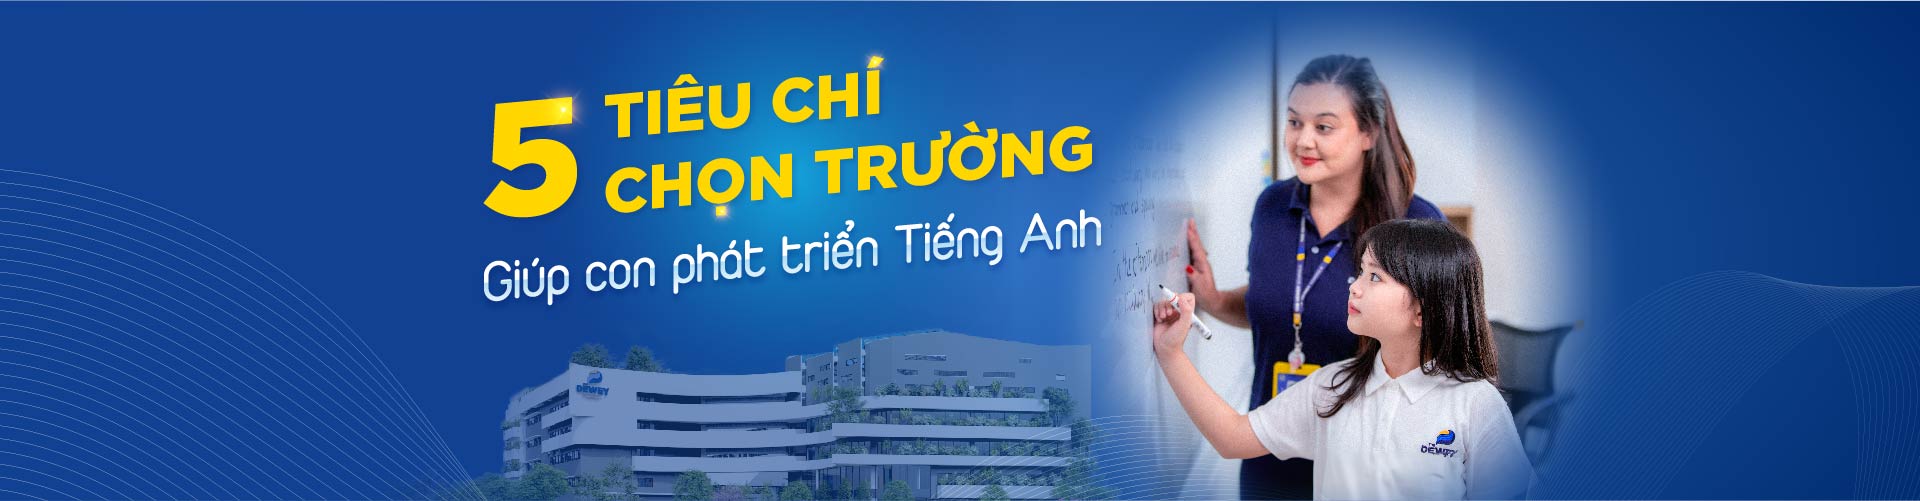 hoc-tieng-anh